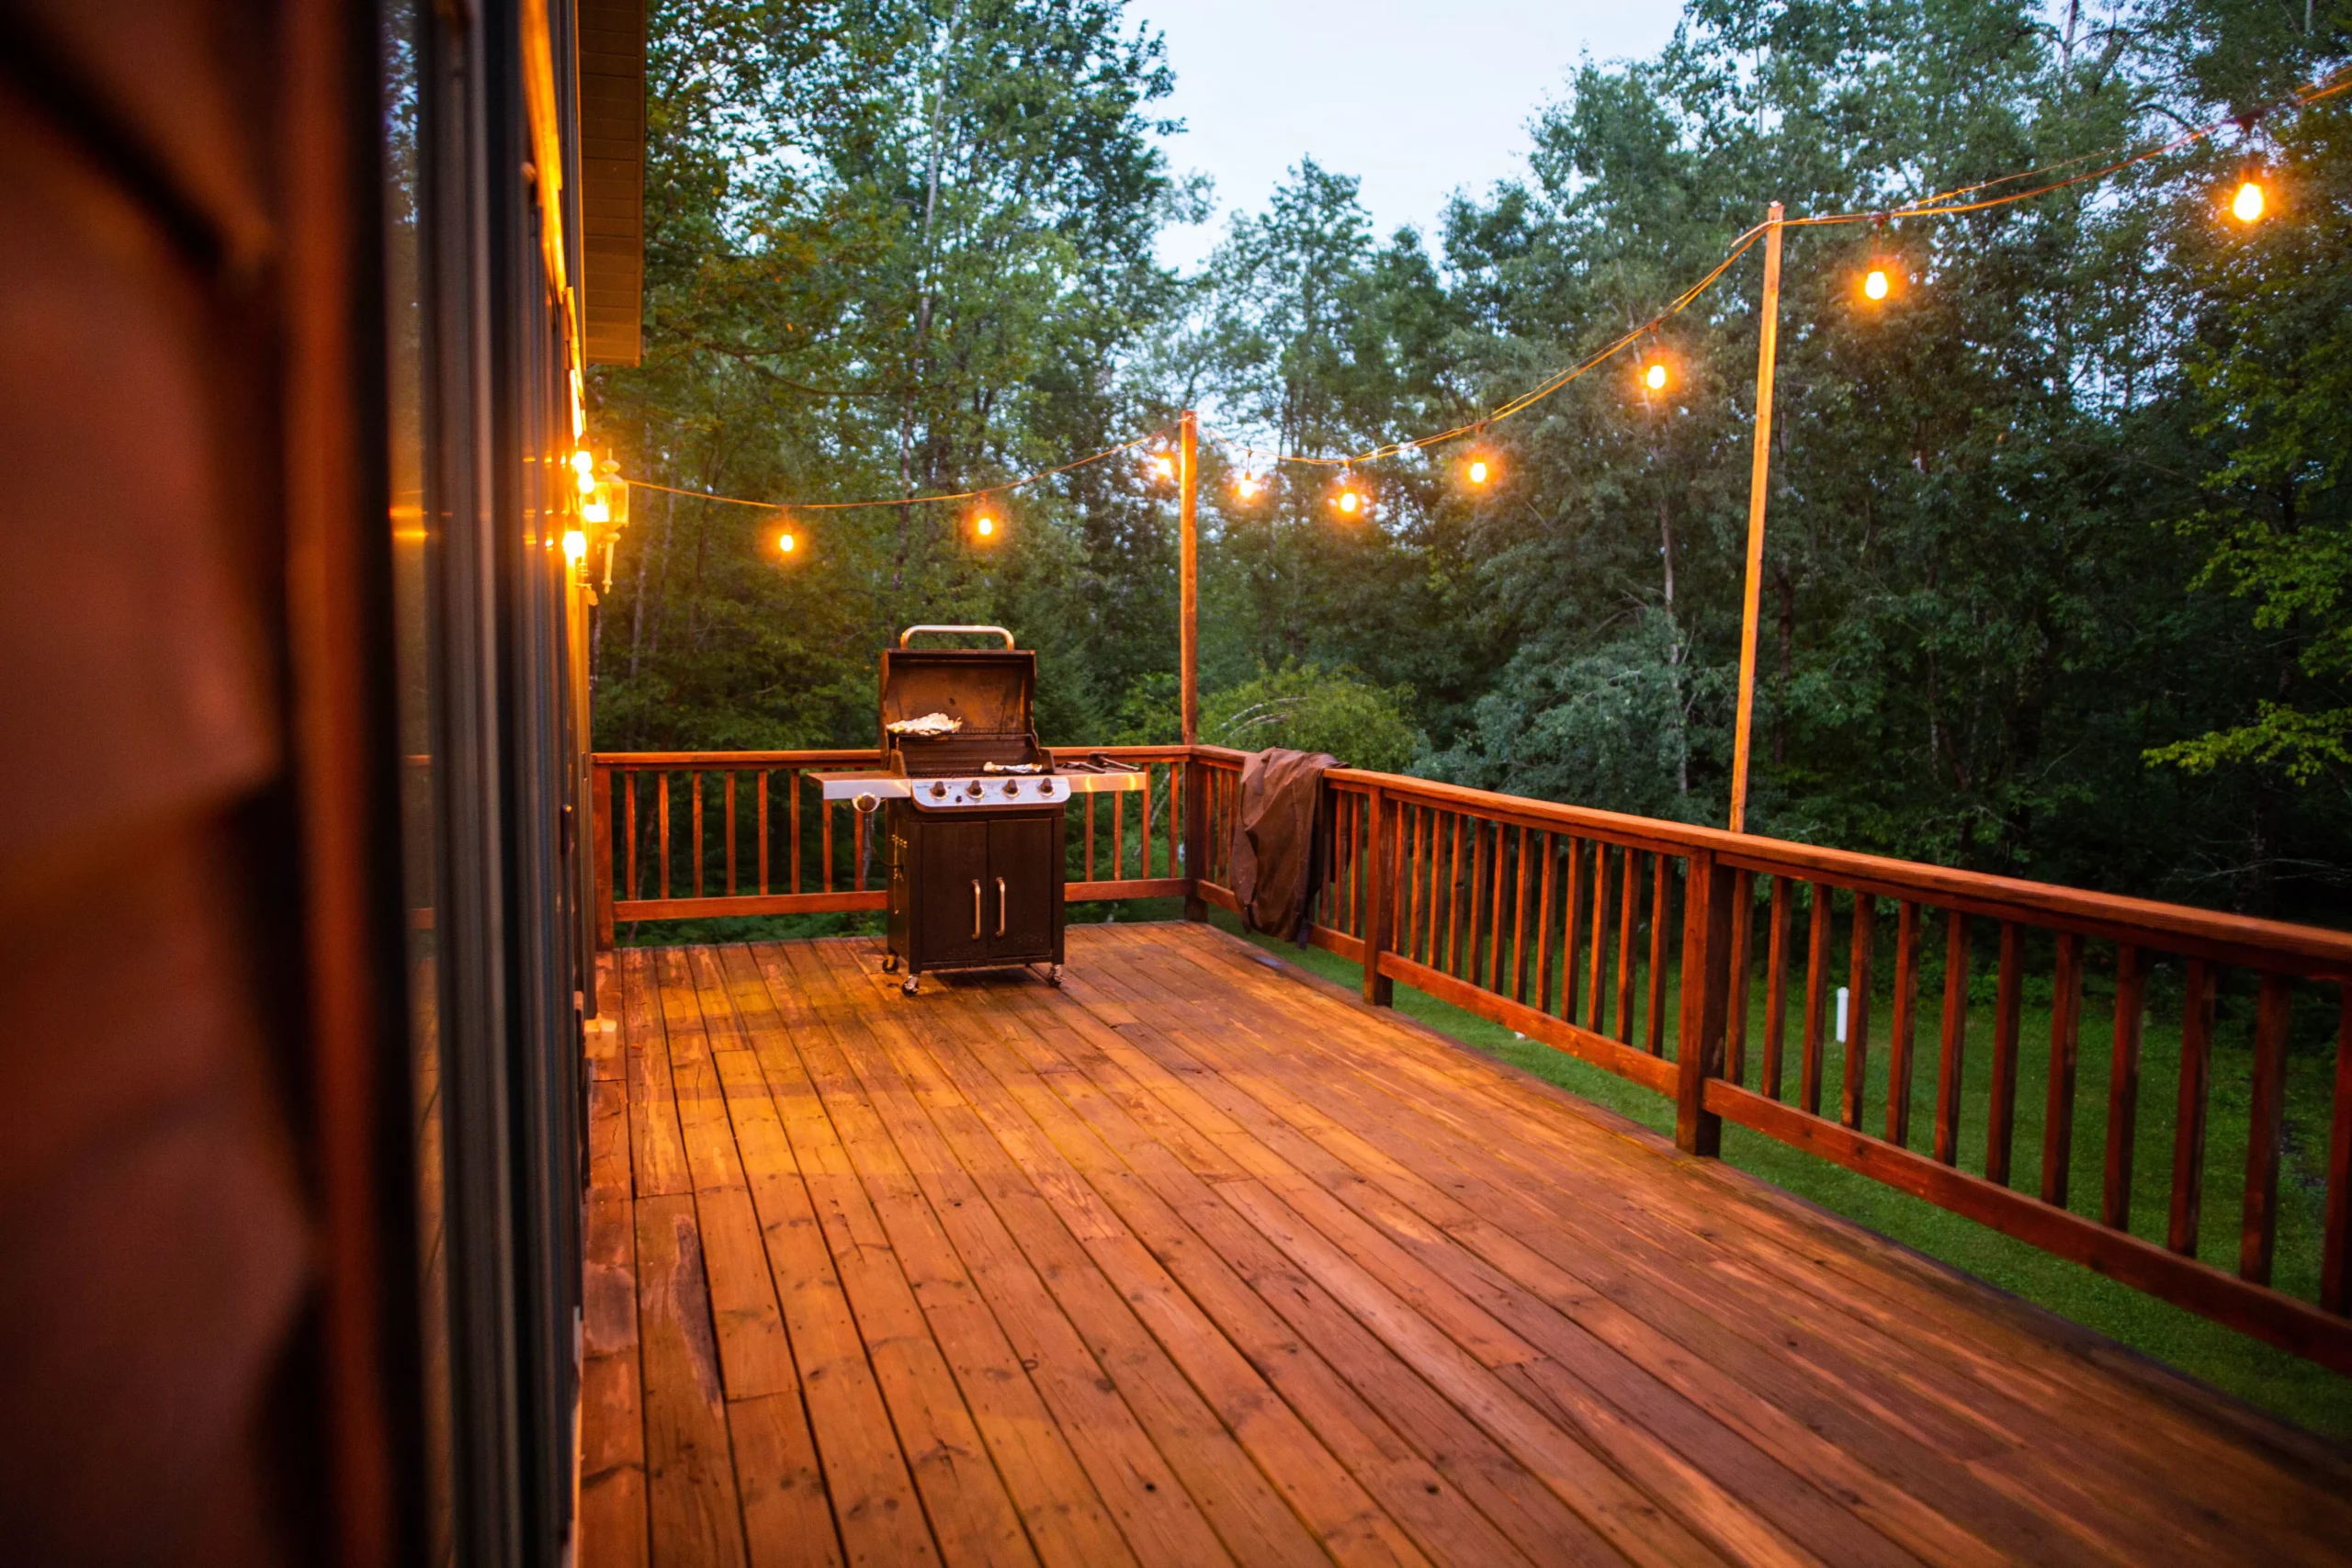 Wooden porch with string lights and grill